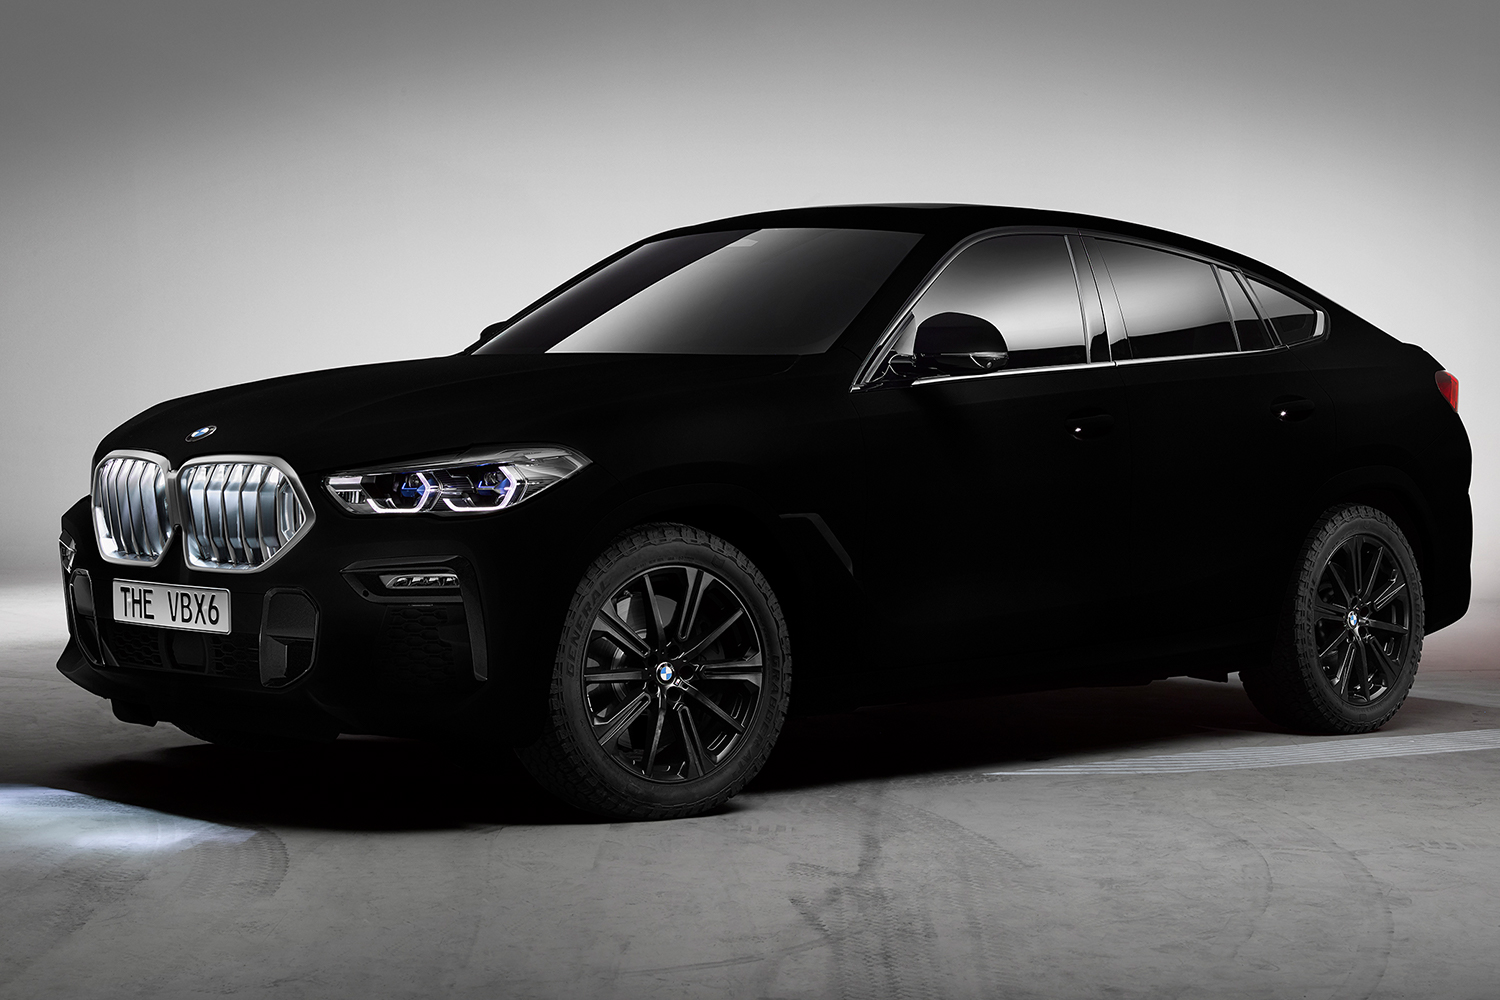 BMW Painted a Car in Vantablack, One of the Darkest Man-Made Substances